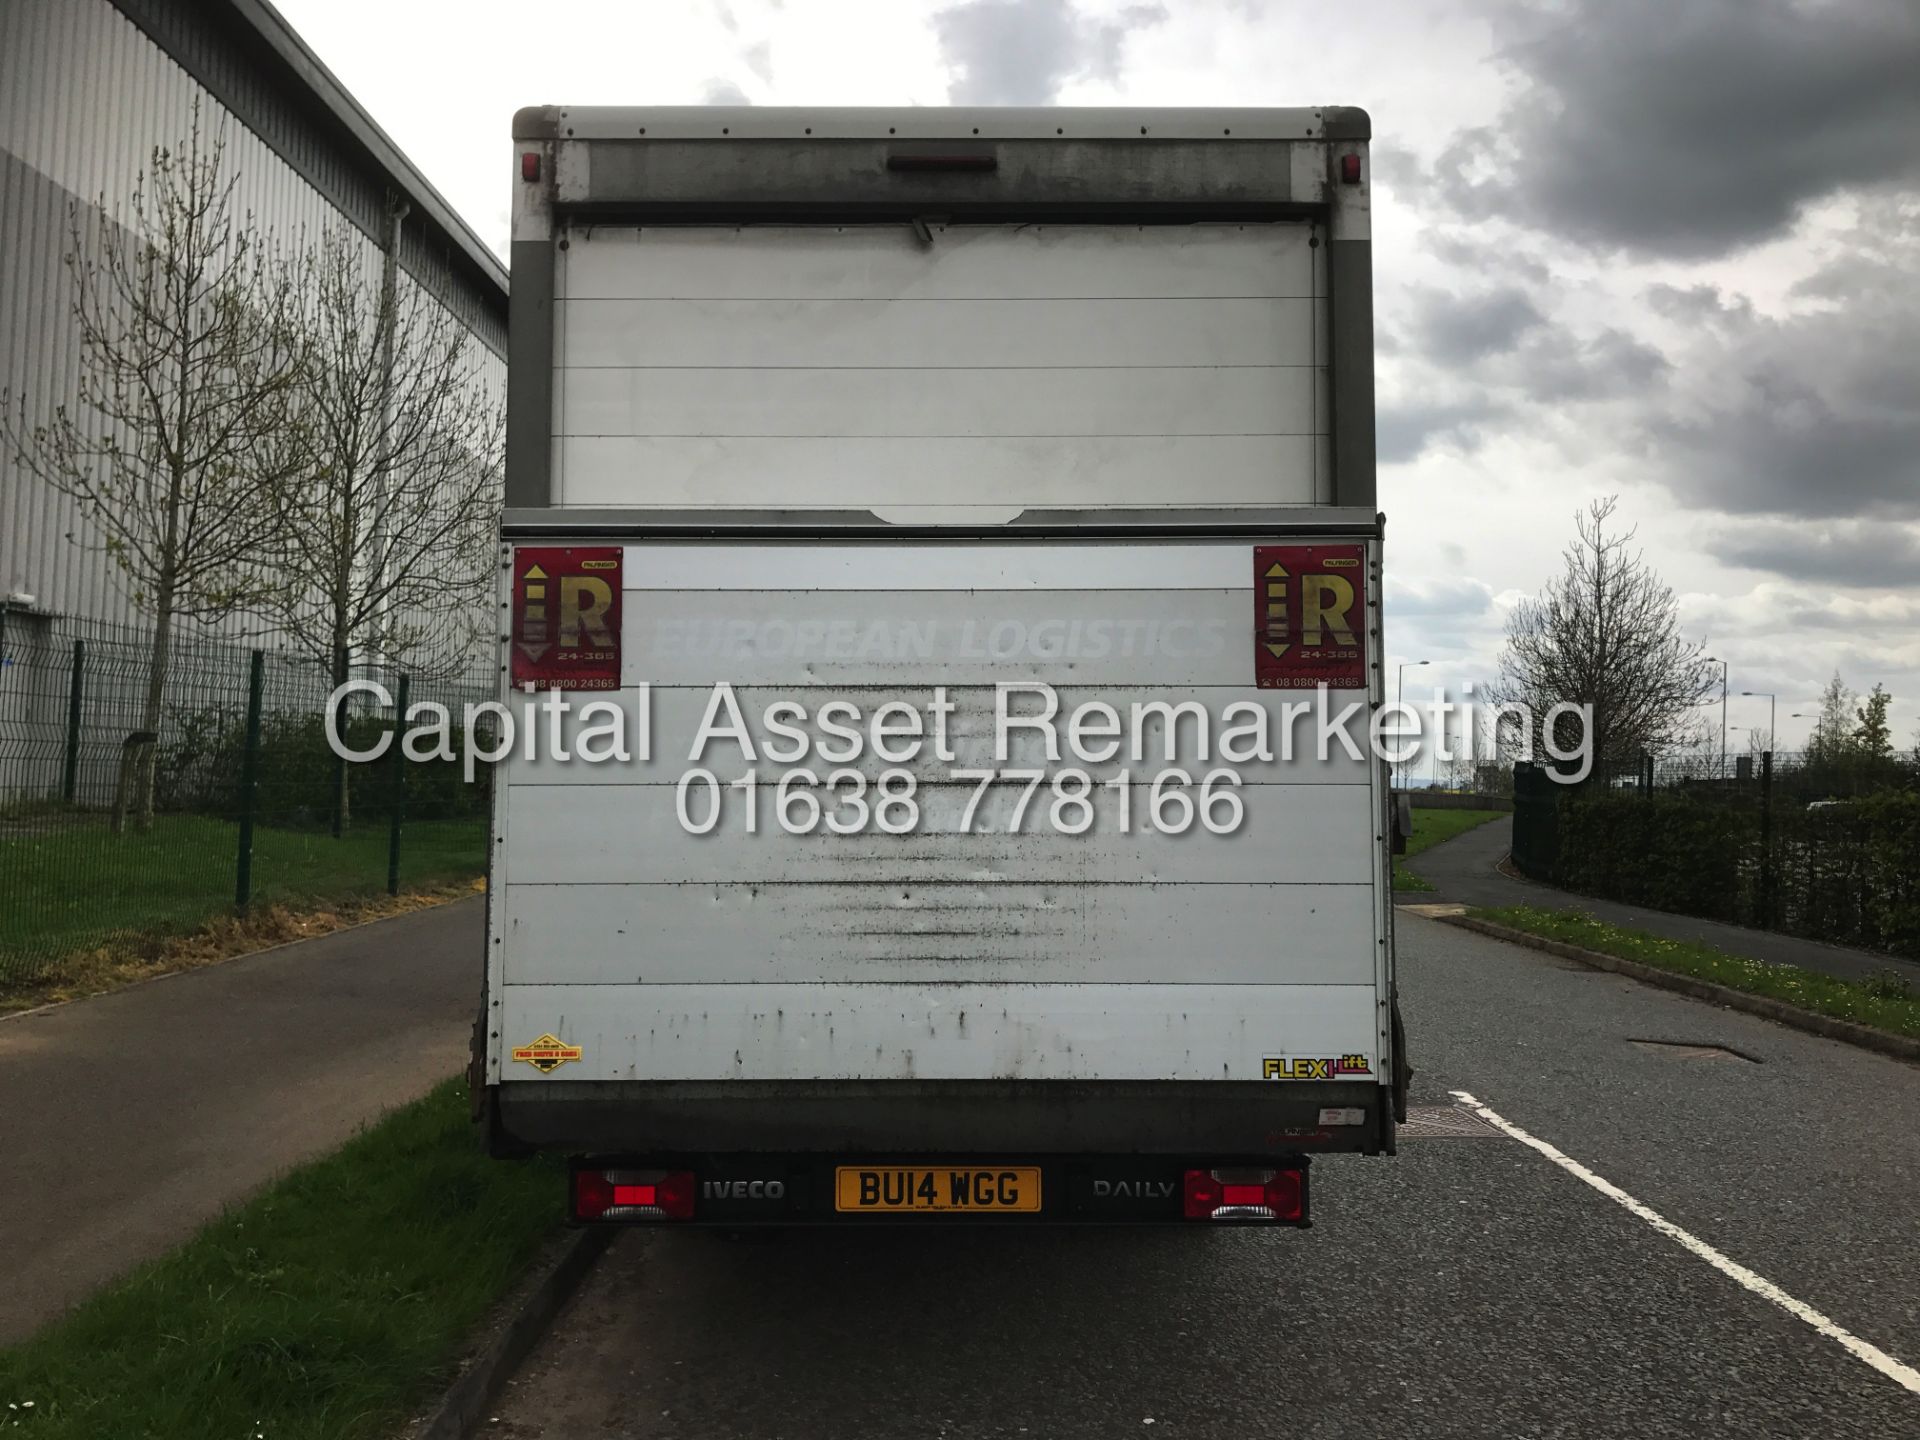 ON SALE-IVECO DAILY 3.0TD 35C15 "150BHP-6 SPEED" 14FT LUTON BOX VAN (14 REG) TWIN WHEELER -TAIL LIFT - Image 5 of 18